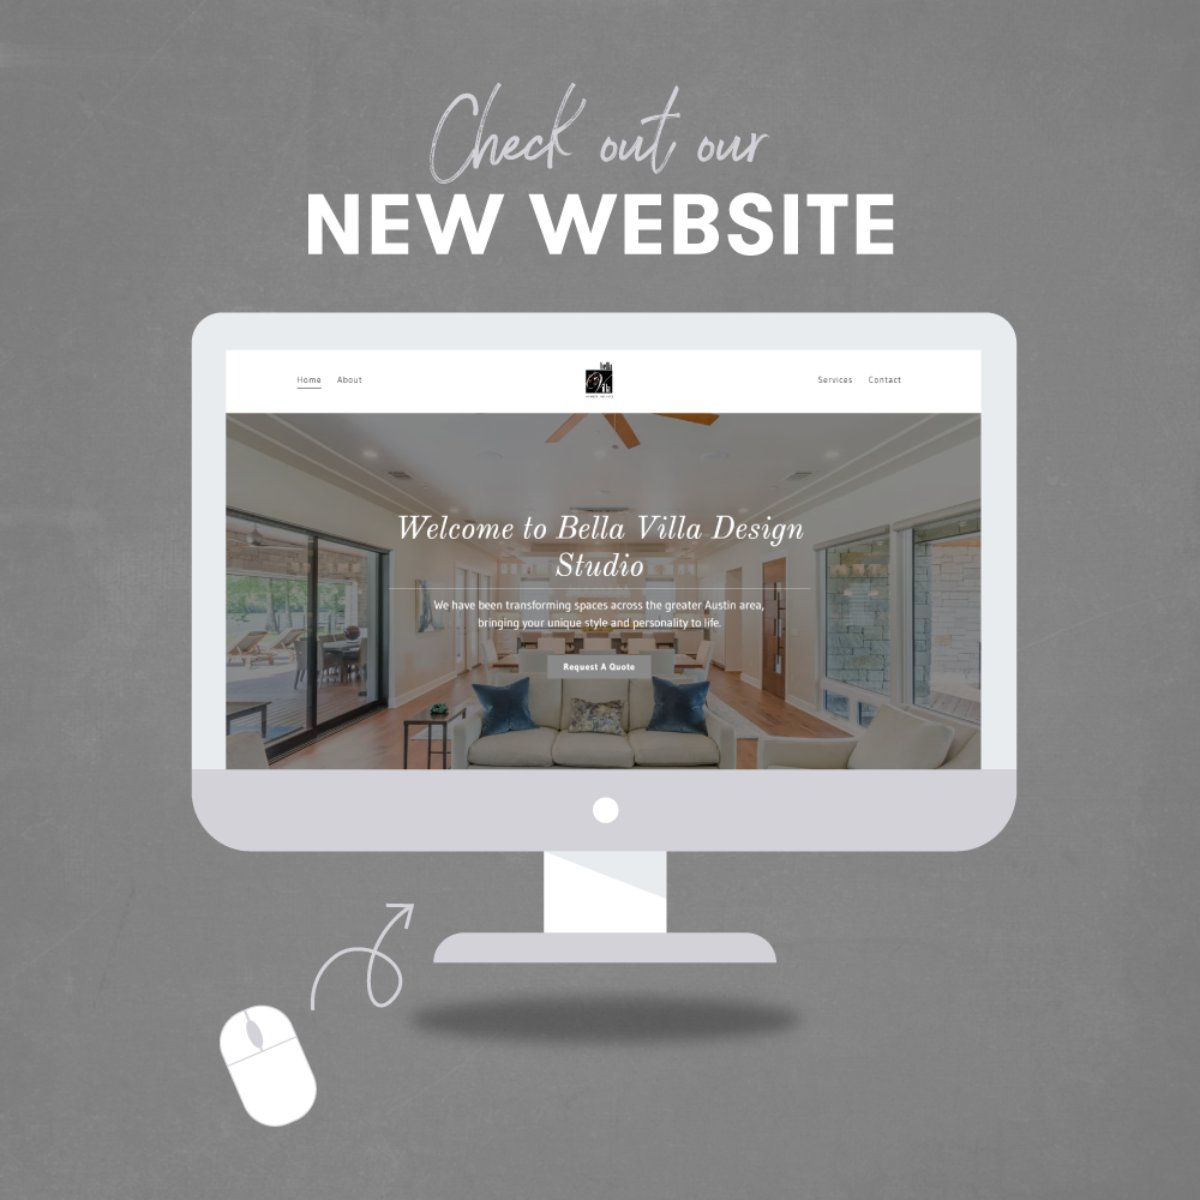 Our new website is live! To learn more about our services, visit bellavillads.com #interiordesign #interiordesignatx #atx #austin #austintx #austintexas #bellavillads #bellavilladesignstudio #bellavilla #austindesign #atxinteriordesign #austininteriordesign